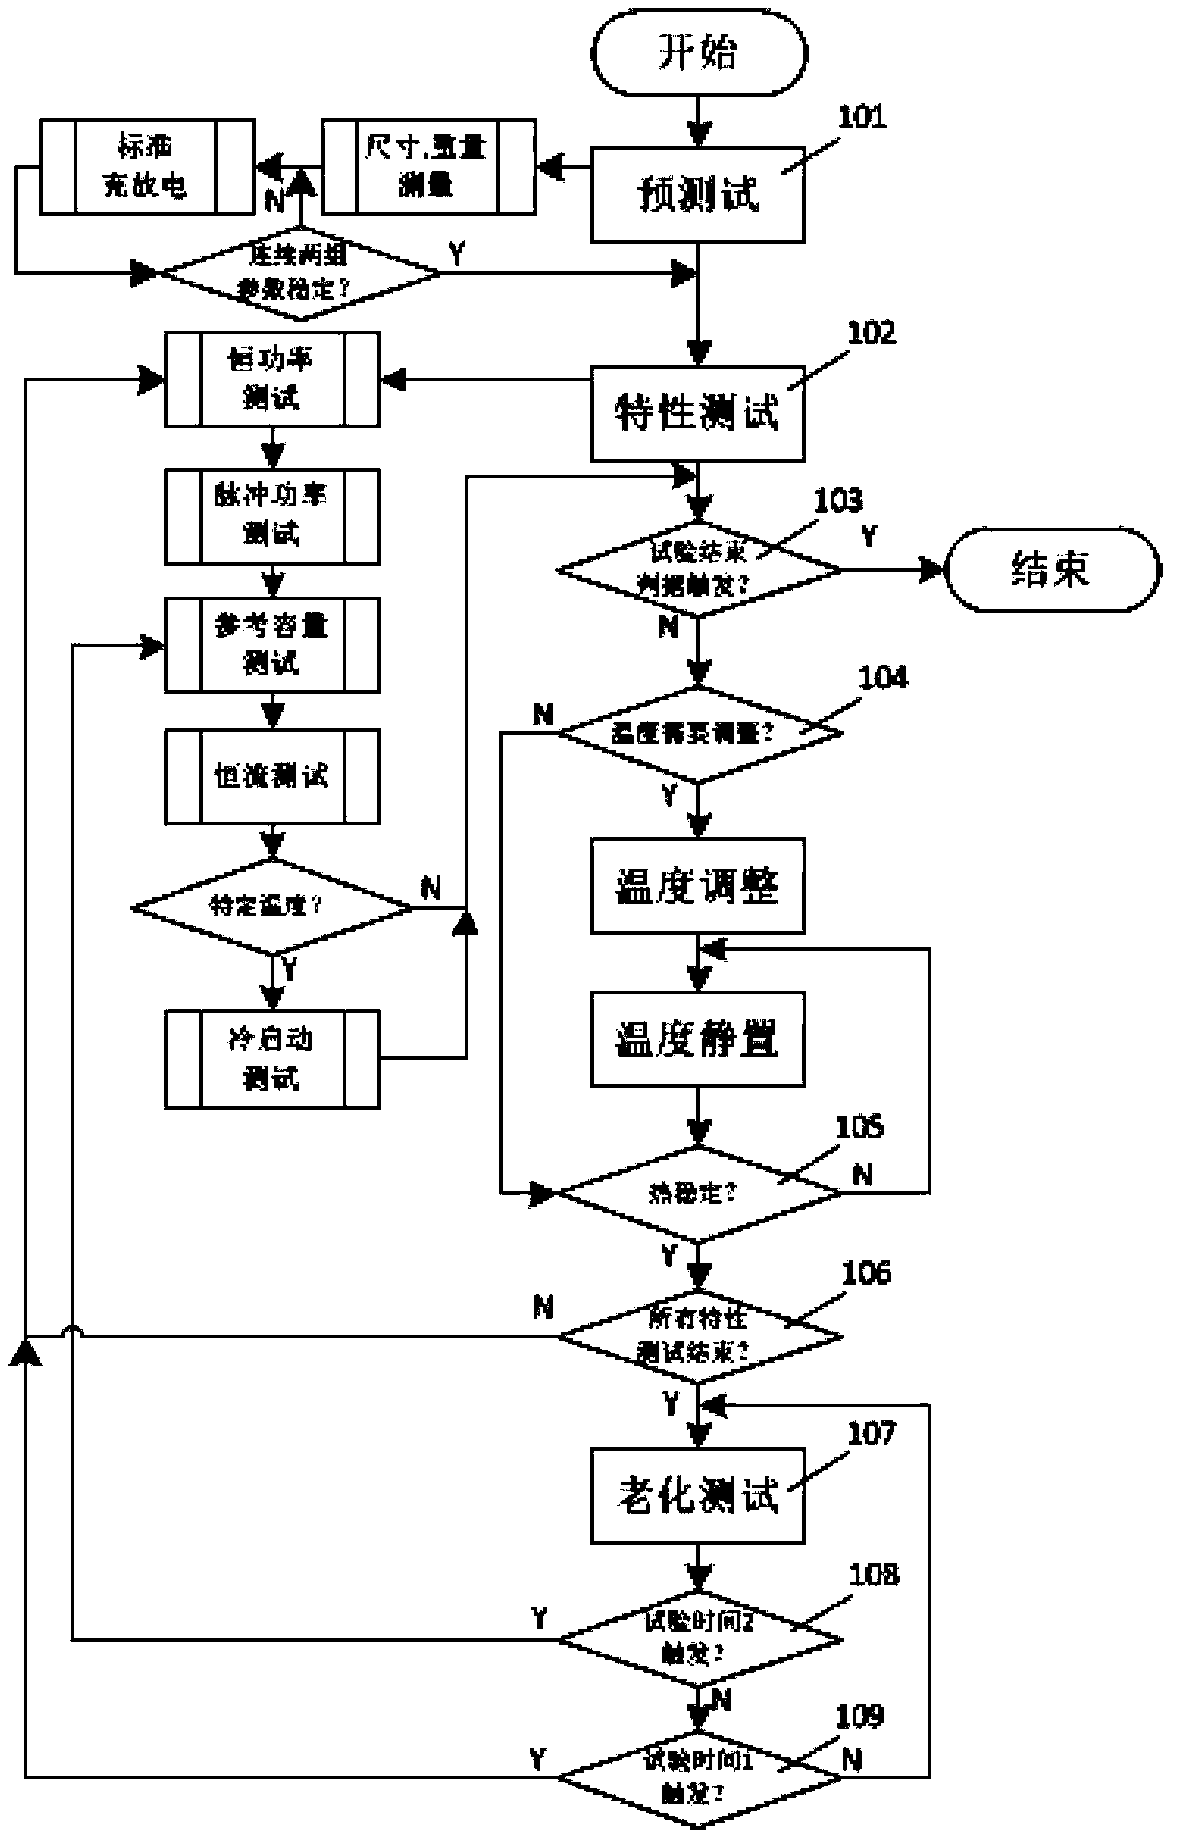 Characteristic testing method and device applied to different aging stages of super capacitors